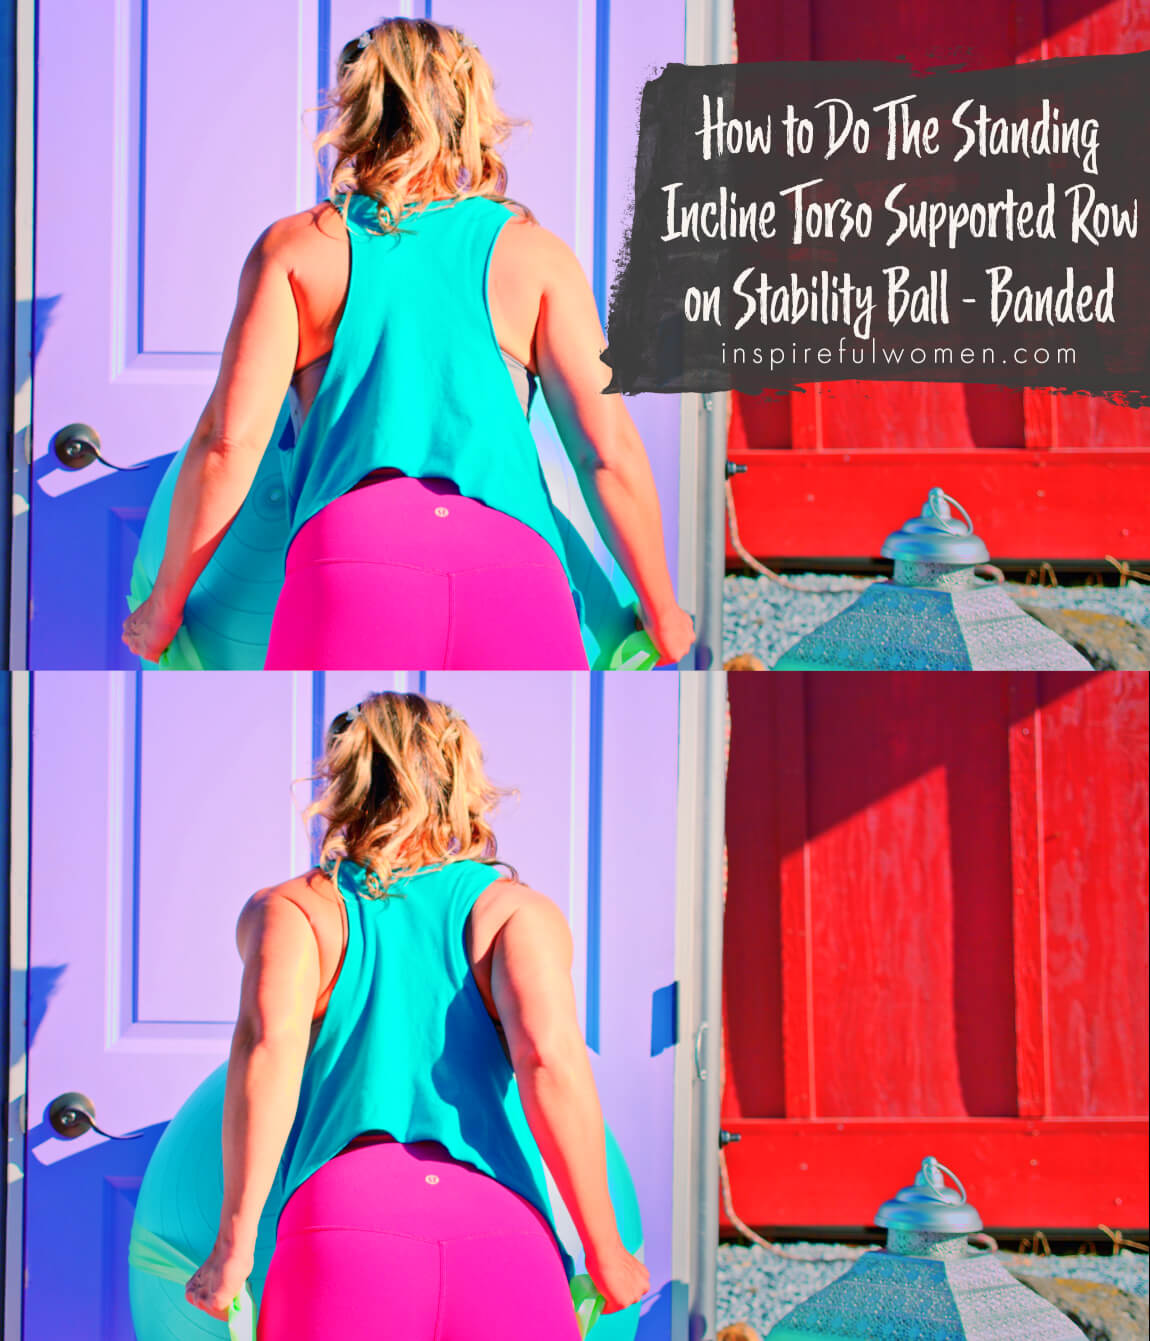 how-to-do-standing-incline-torso-supported-banded-row-stability-ball-exercise-at-home-women-40+-back-view